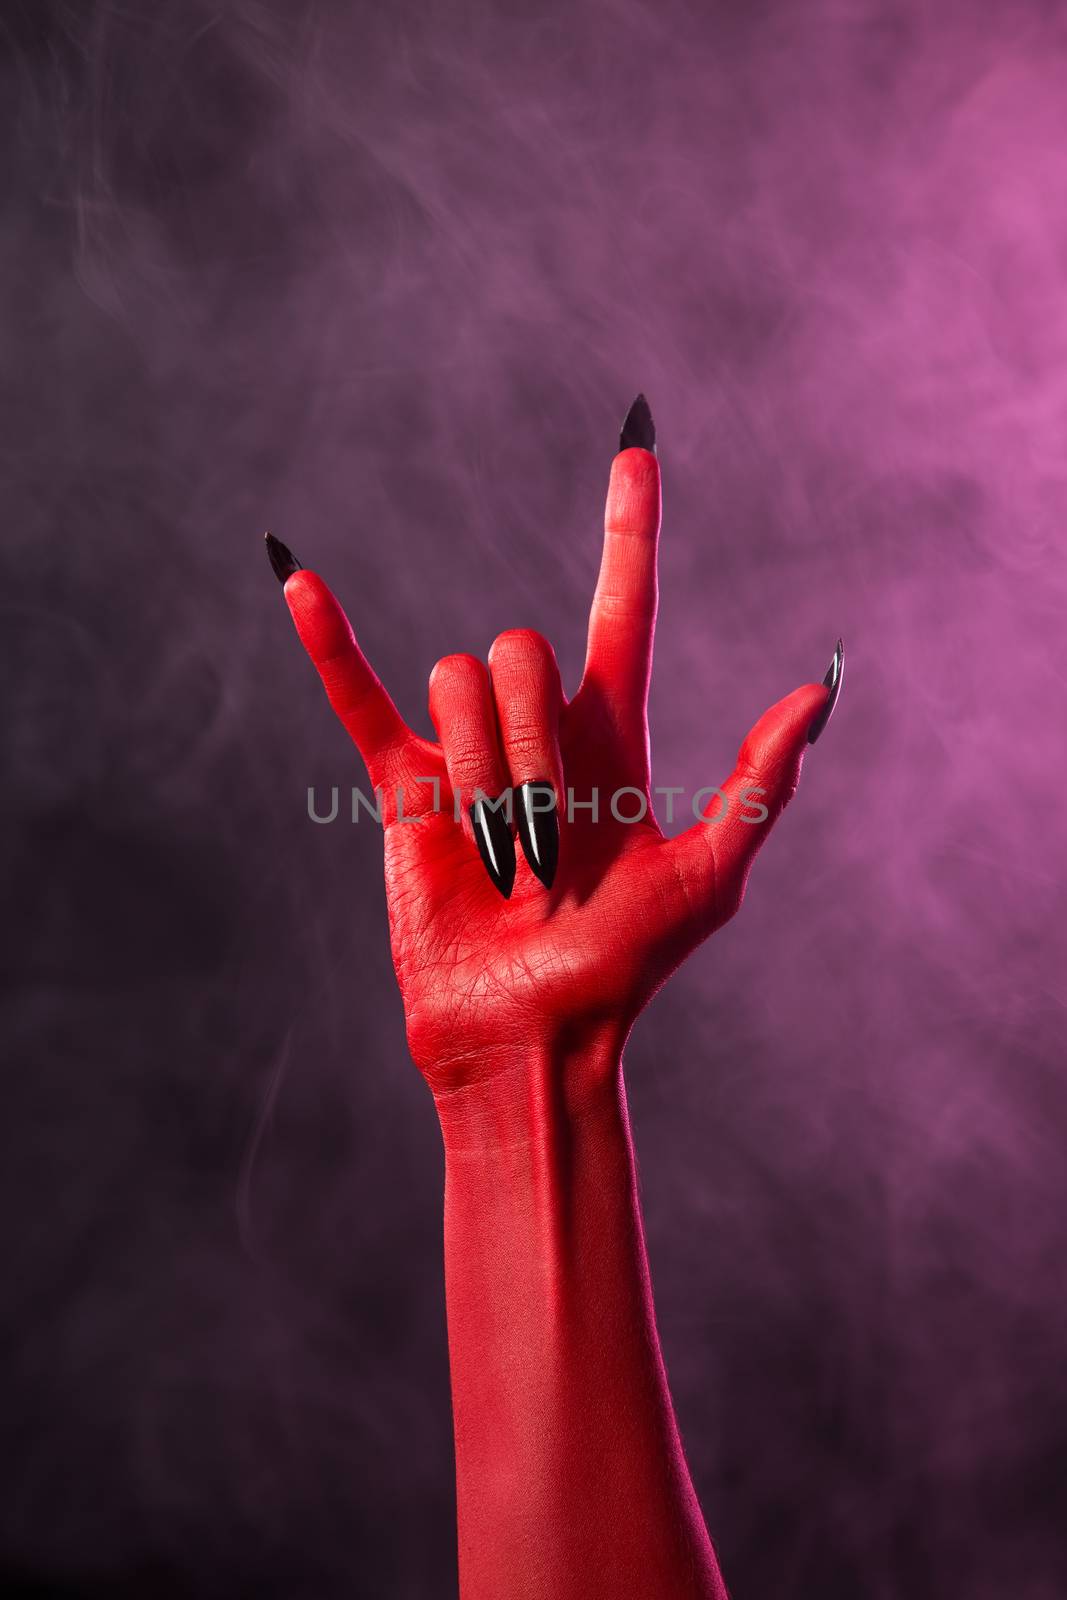 Rock sign, red devil hand with black nails, Halloween 